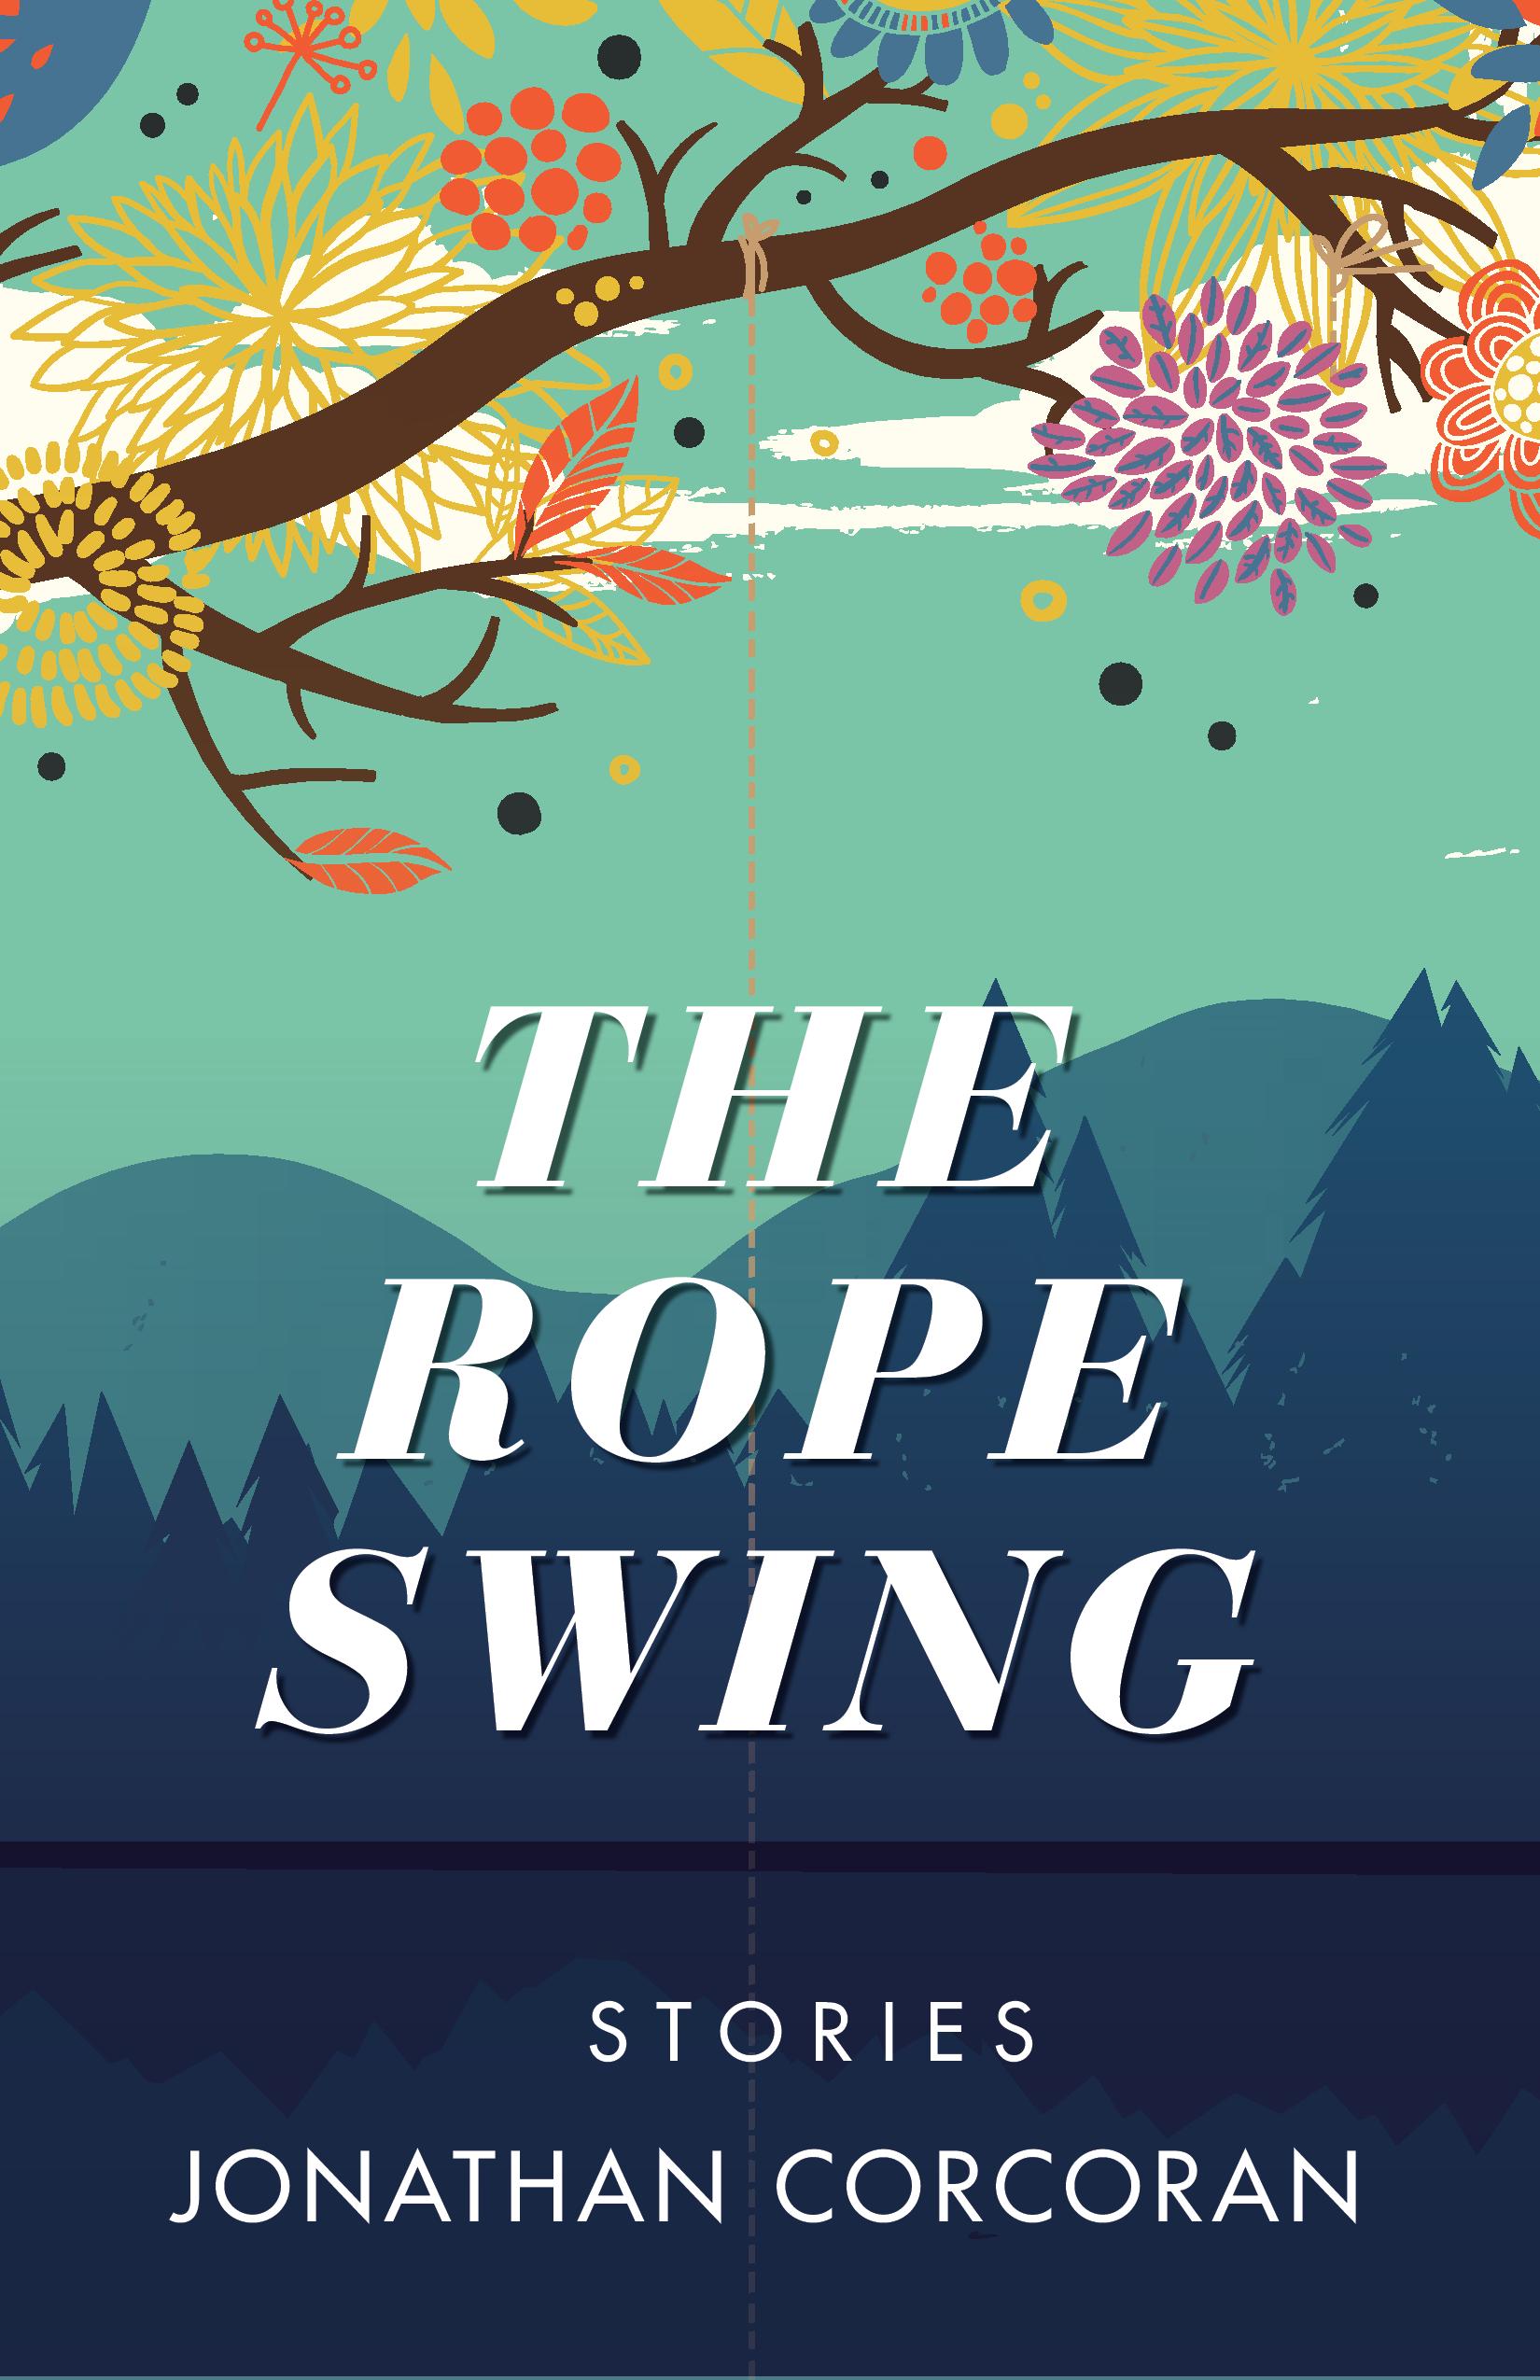 Book Review: The Rope Swing by Jonathan Corcoran - The Los Angeles Review  The Los Angeles Review